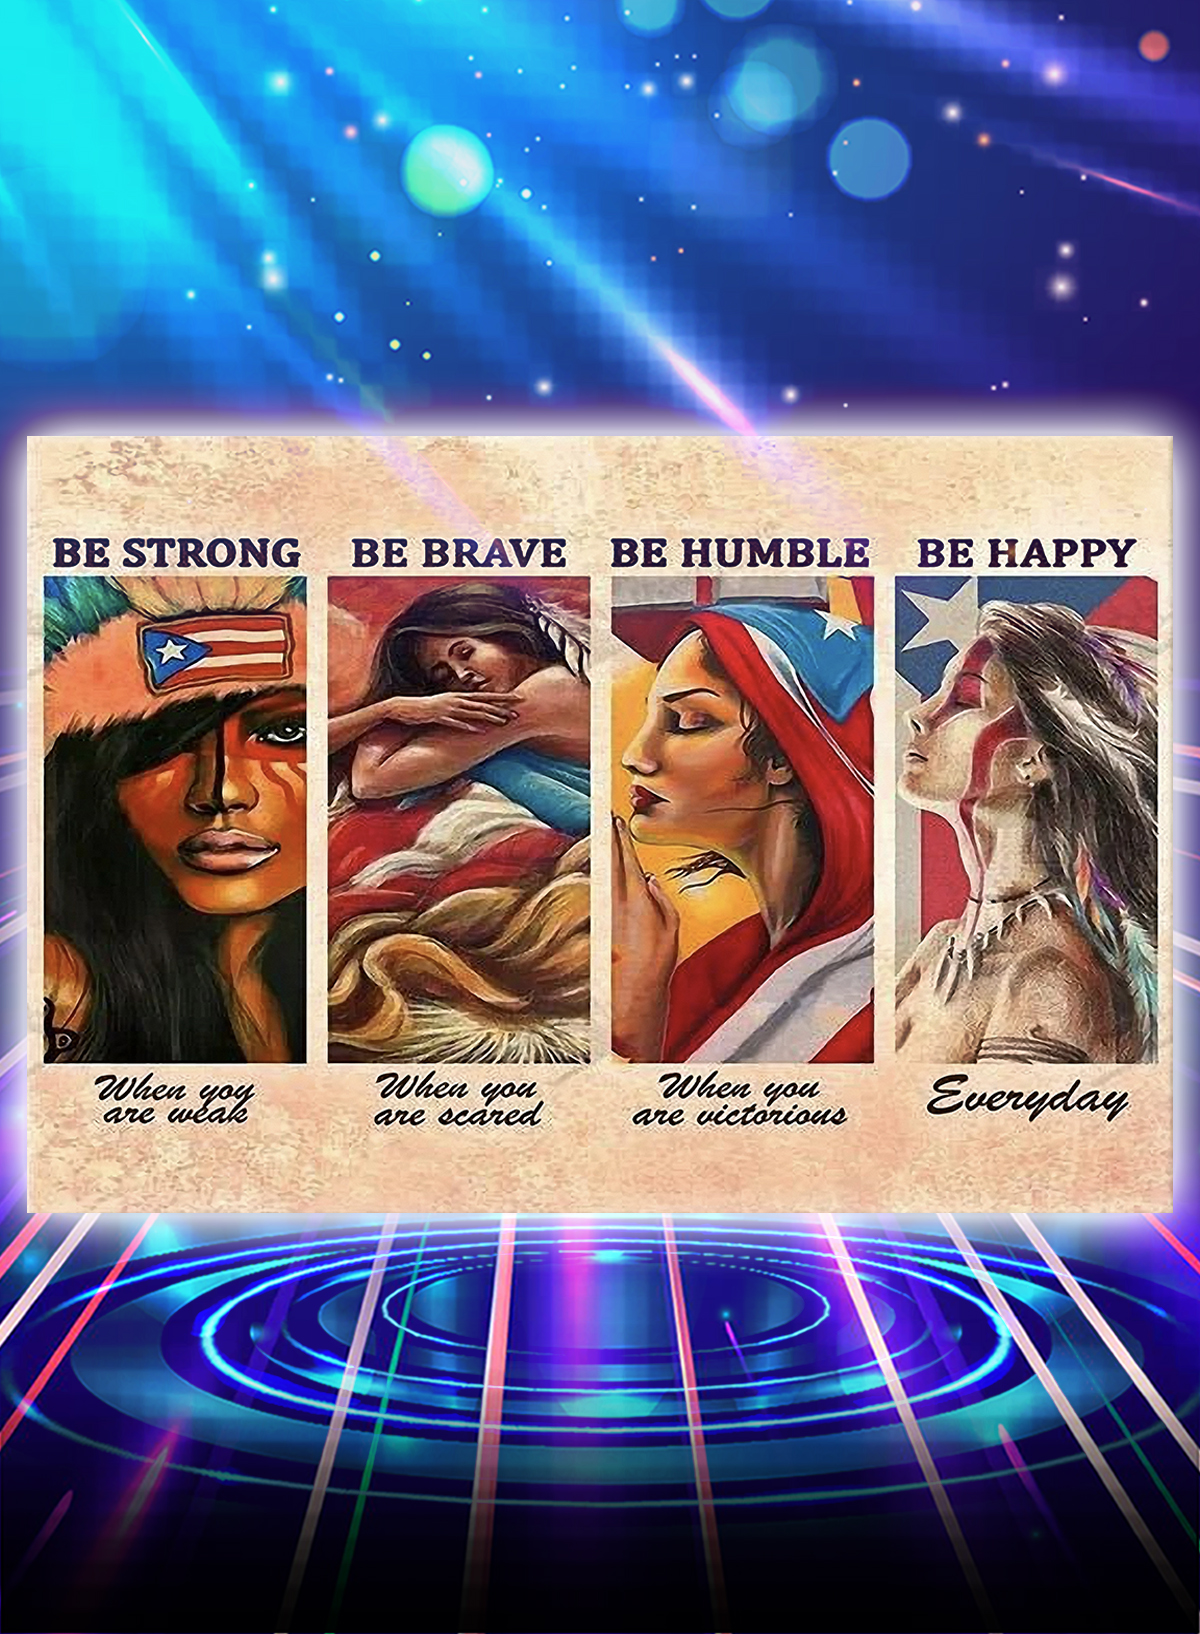 Puerto rico girls be strong be brave be humble be happy poster - A4